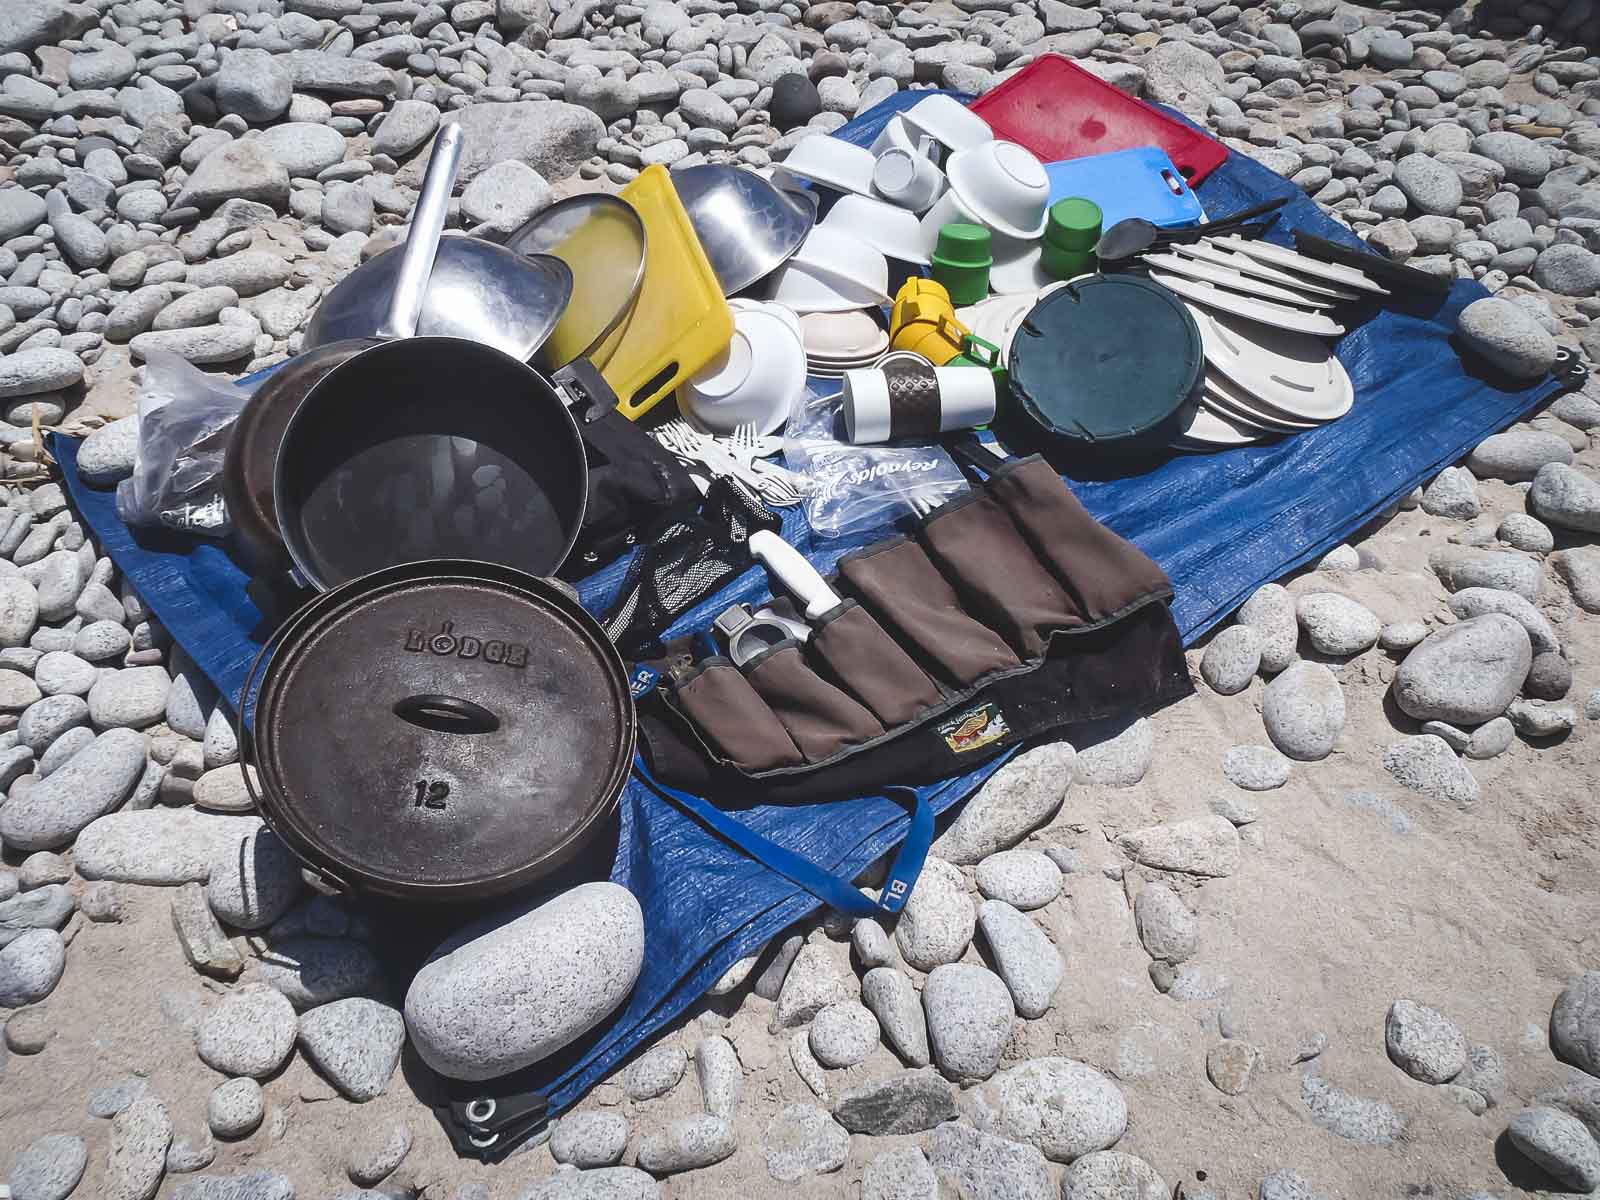 5 Camping Gadgets to Add to Your Pack